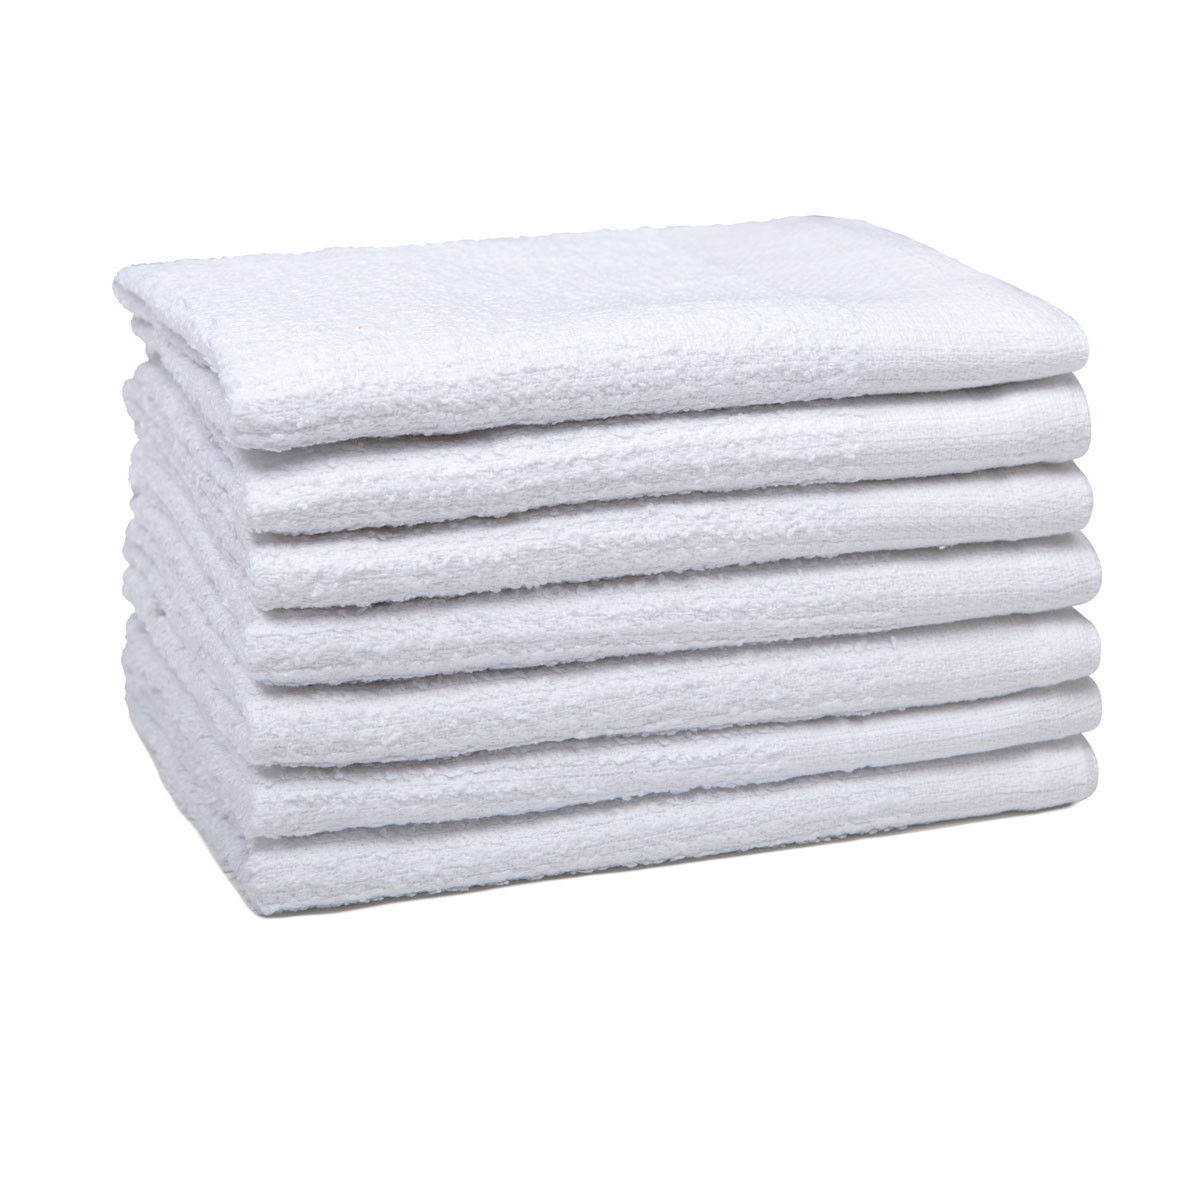 What benefits do the Super constructions of the Bar Mop Towels provide for bar towels?